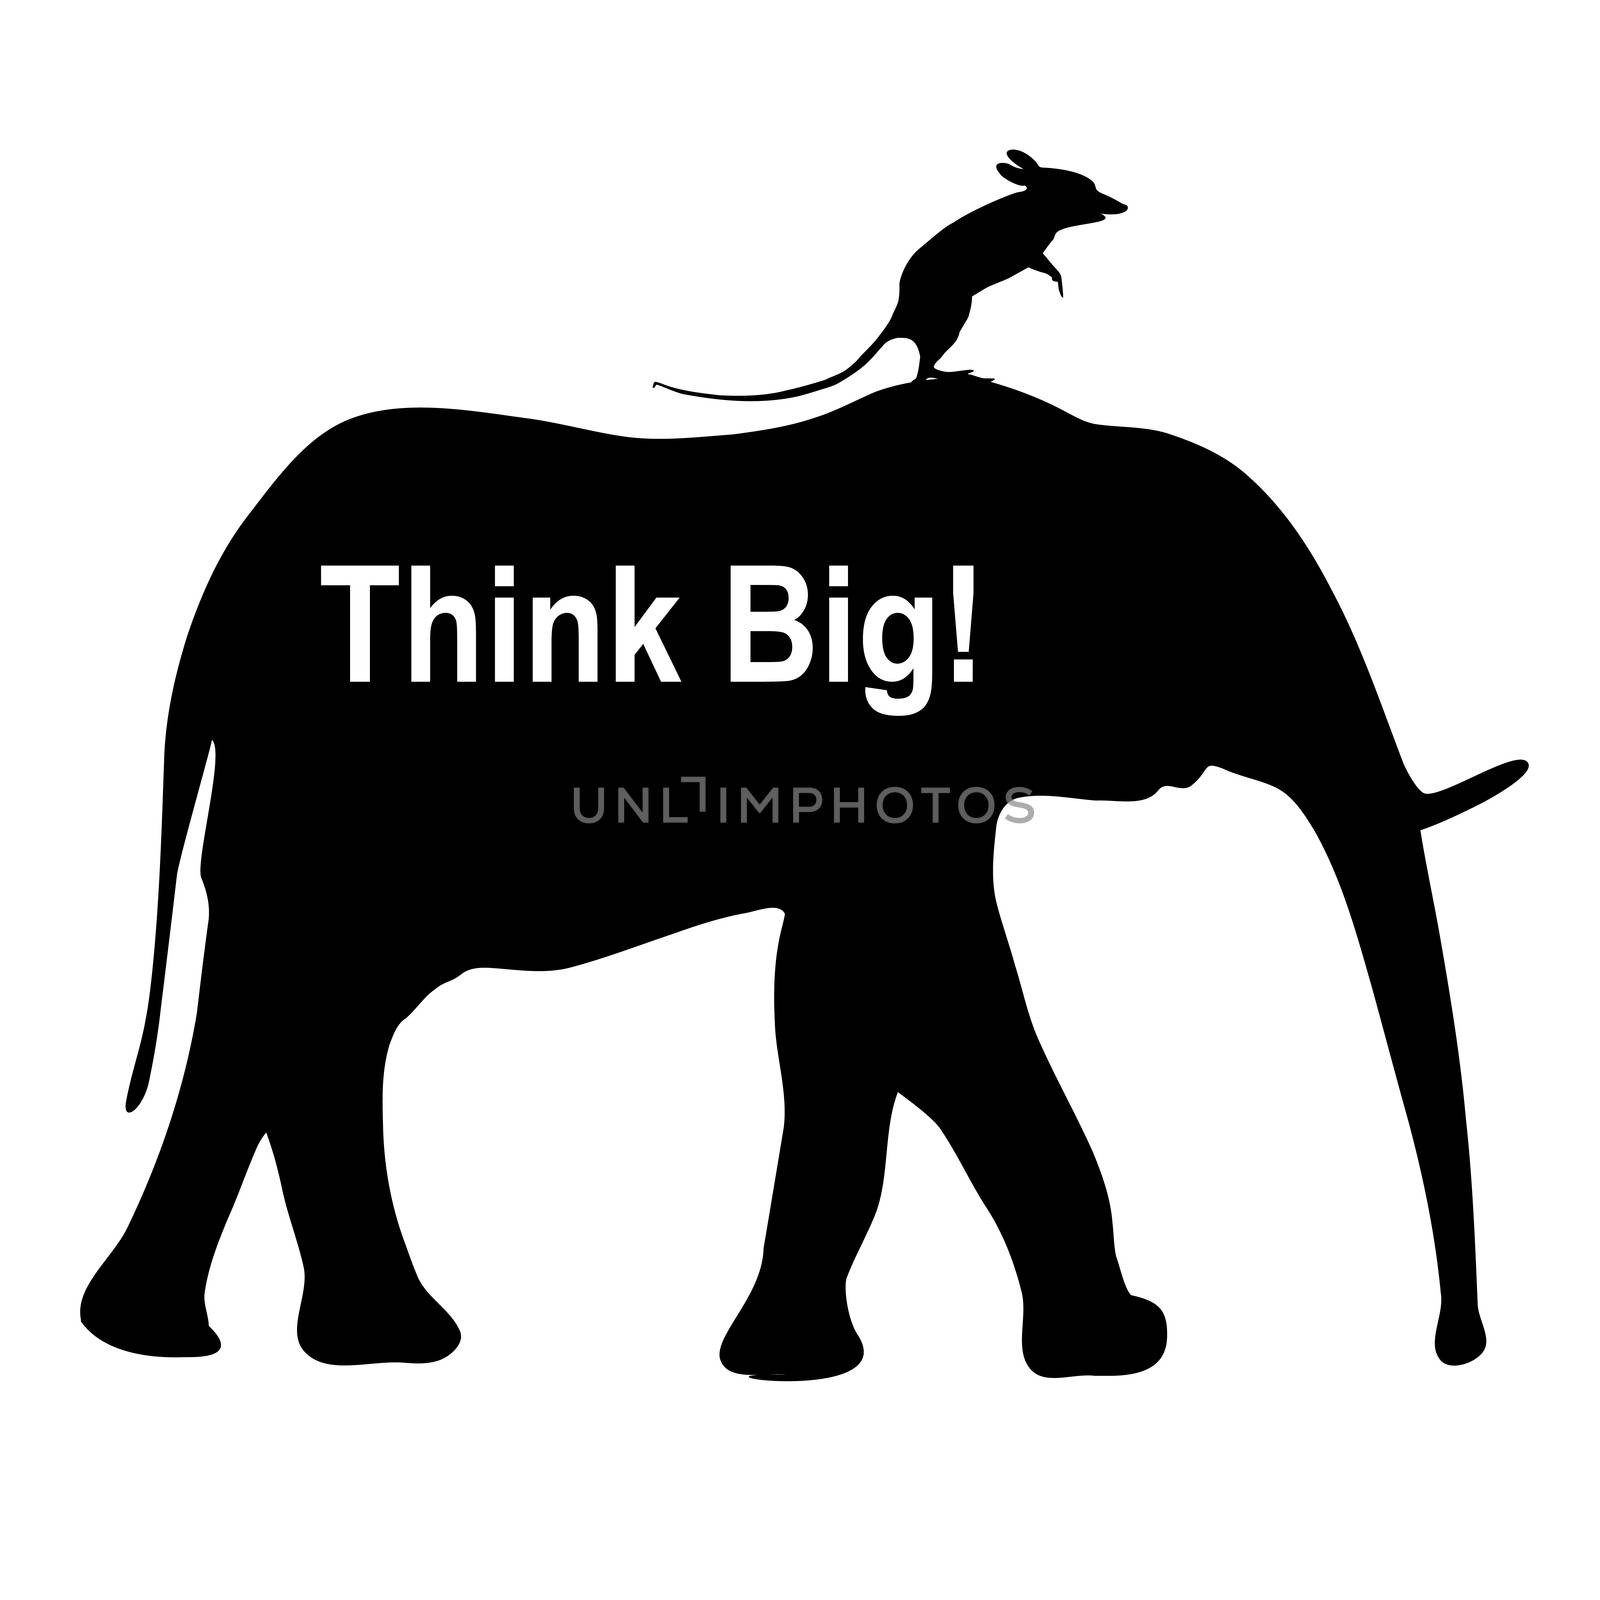 Mouse riding an elephant as business metaphor for imagination and vision